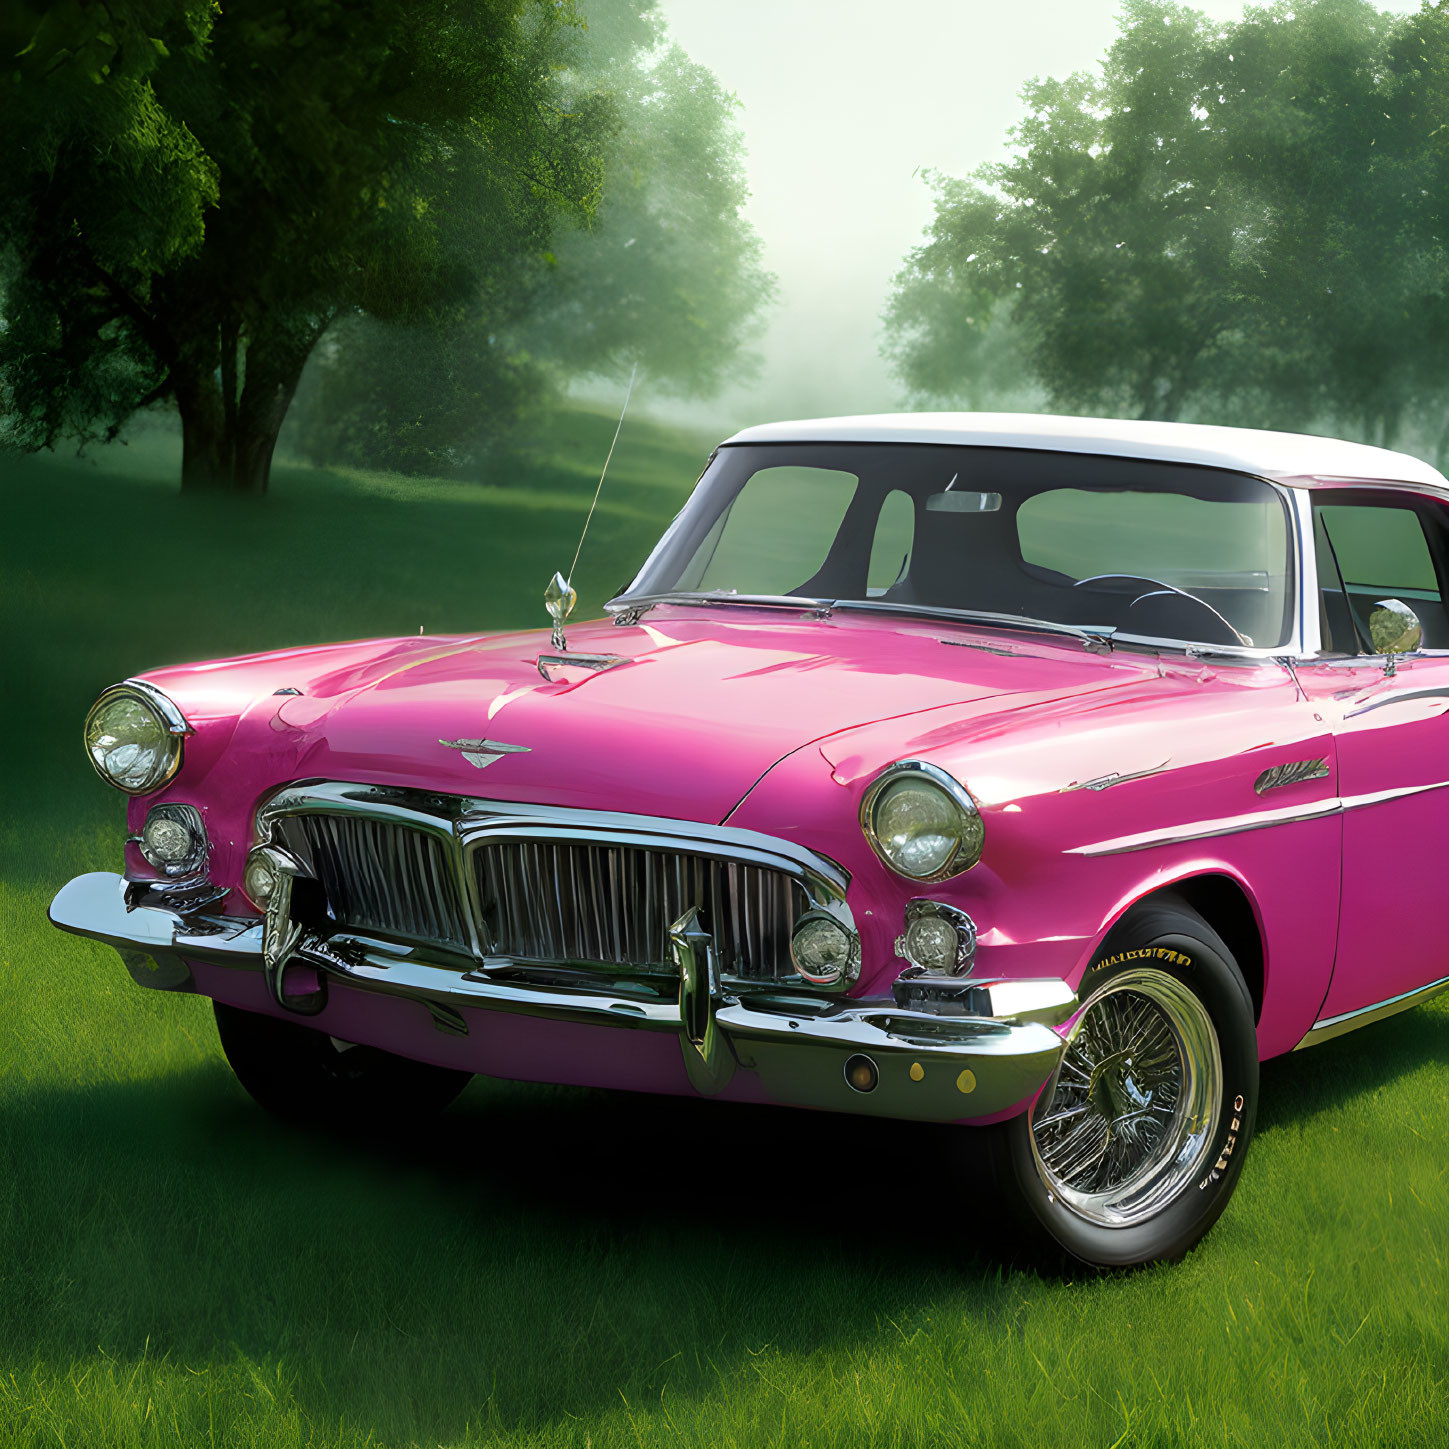 Vintage Pink Car with White-Wall Tires on Green Grass with Misty Tree Background